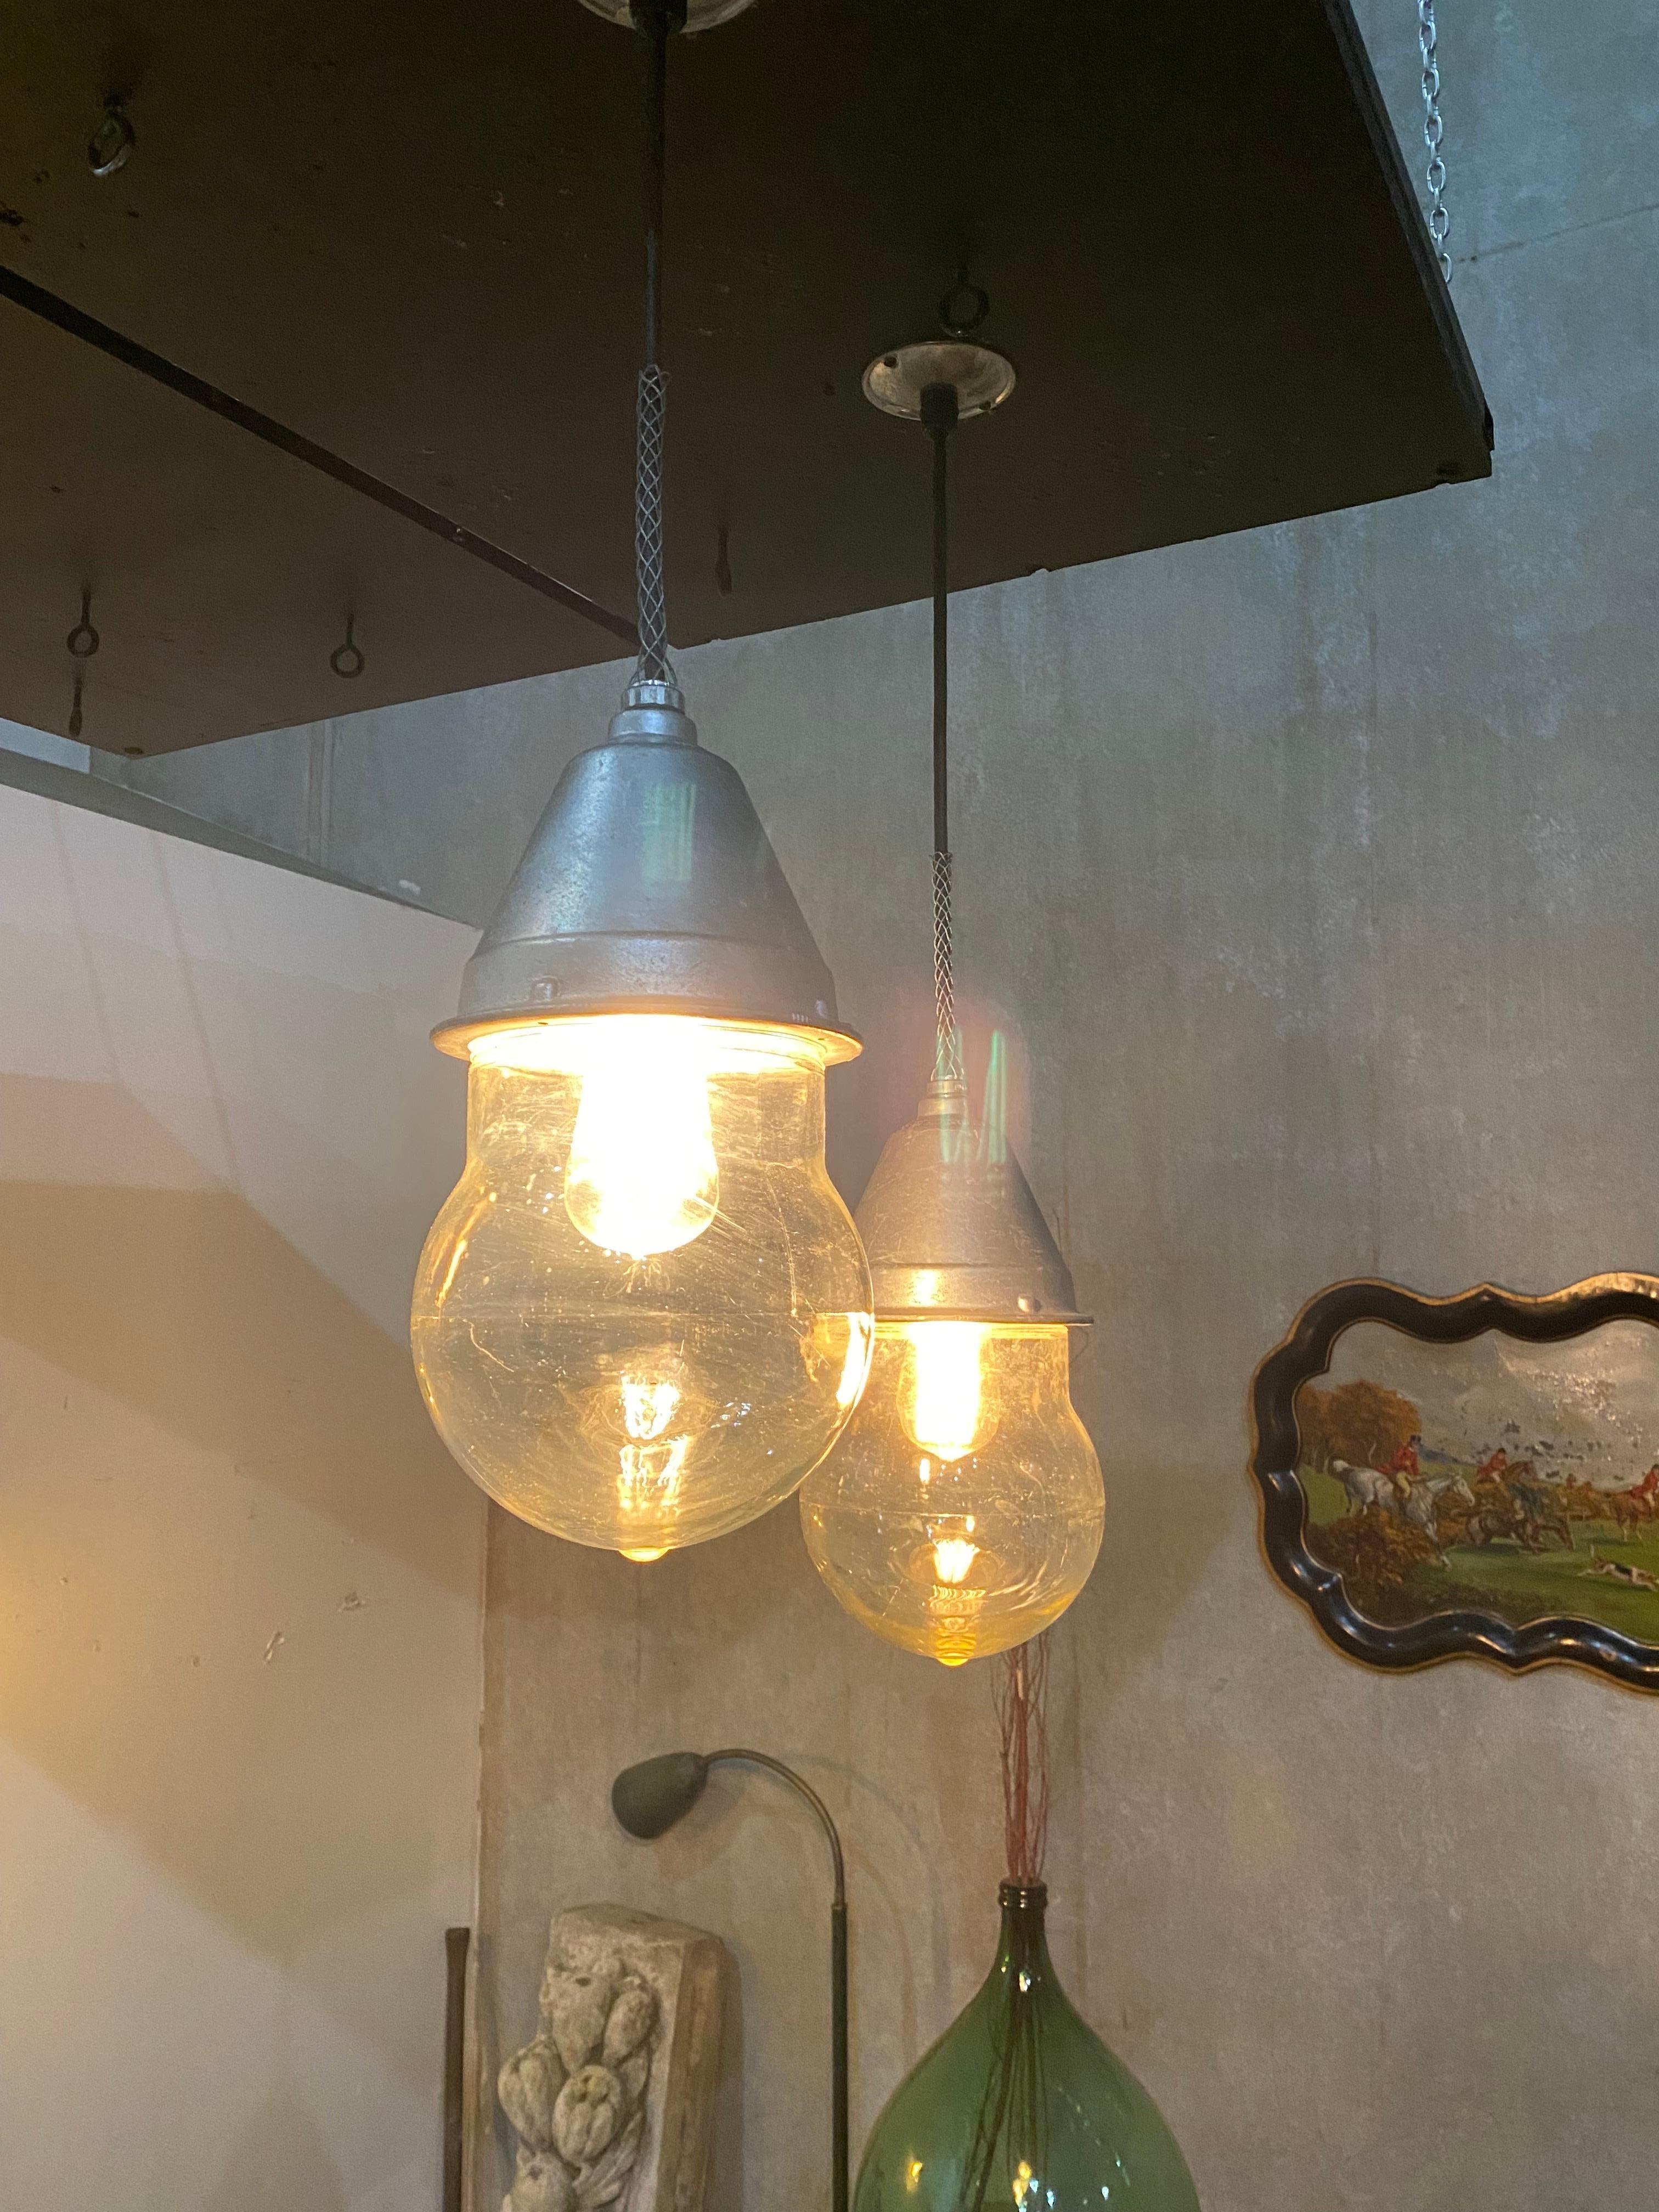 Machine-Made 1940 Industrial Crouse Hinds VDB Pendant Light